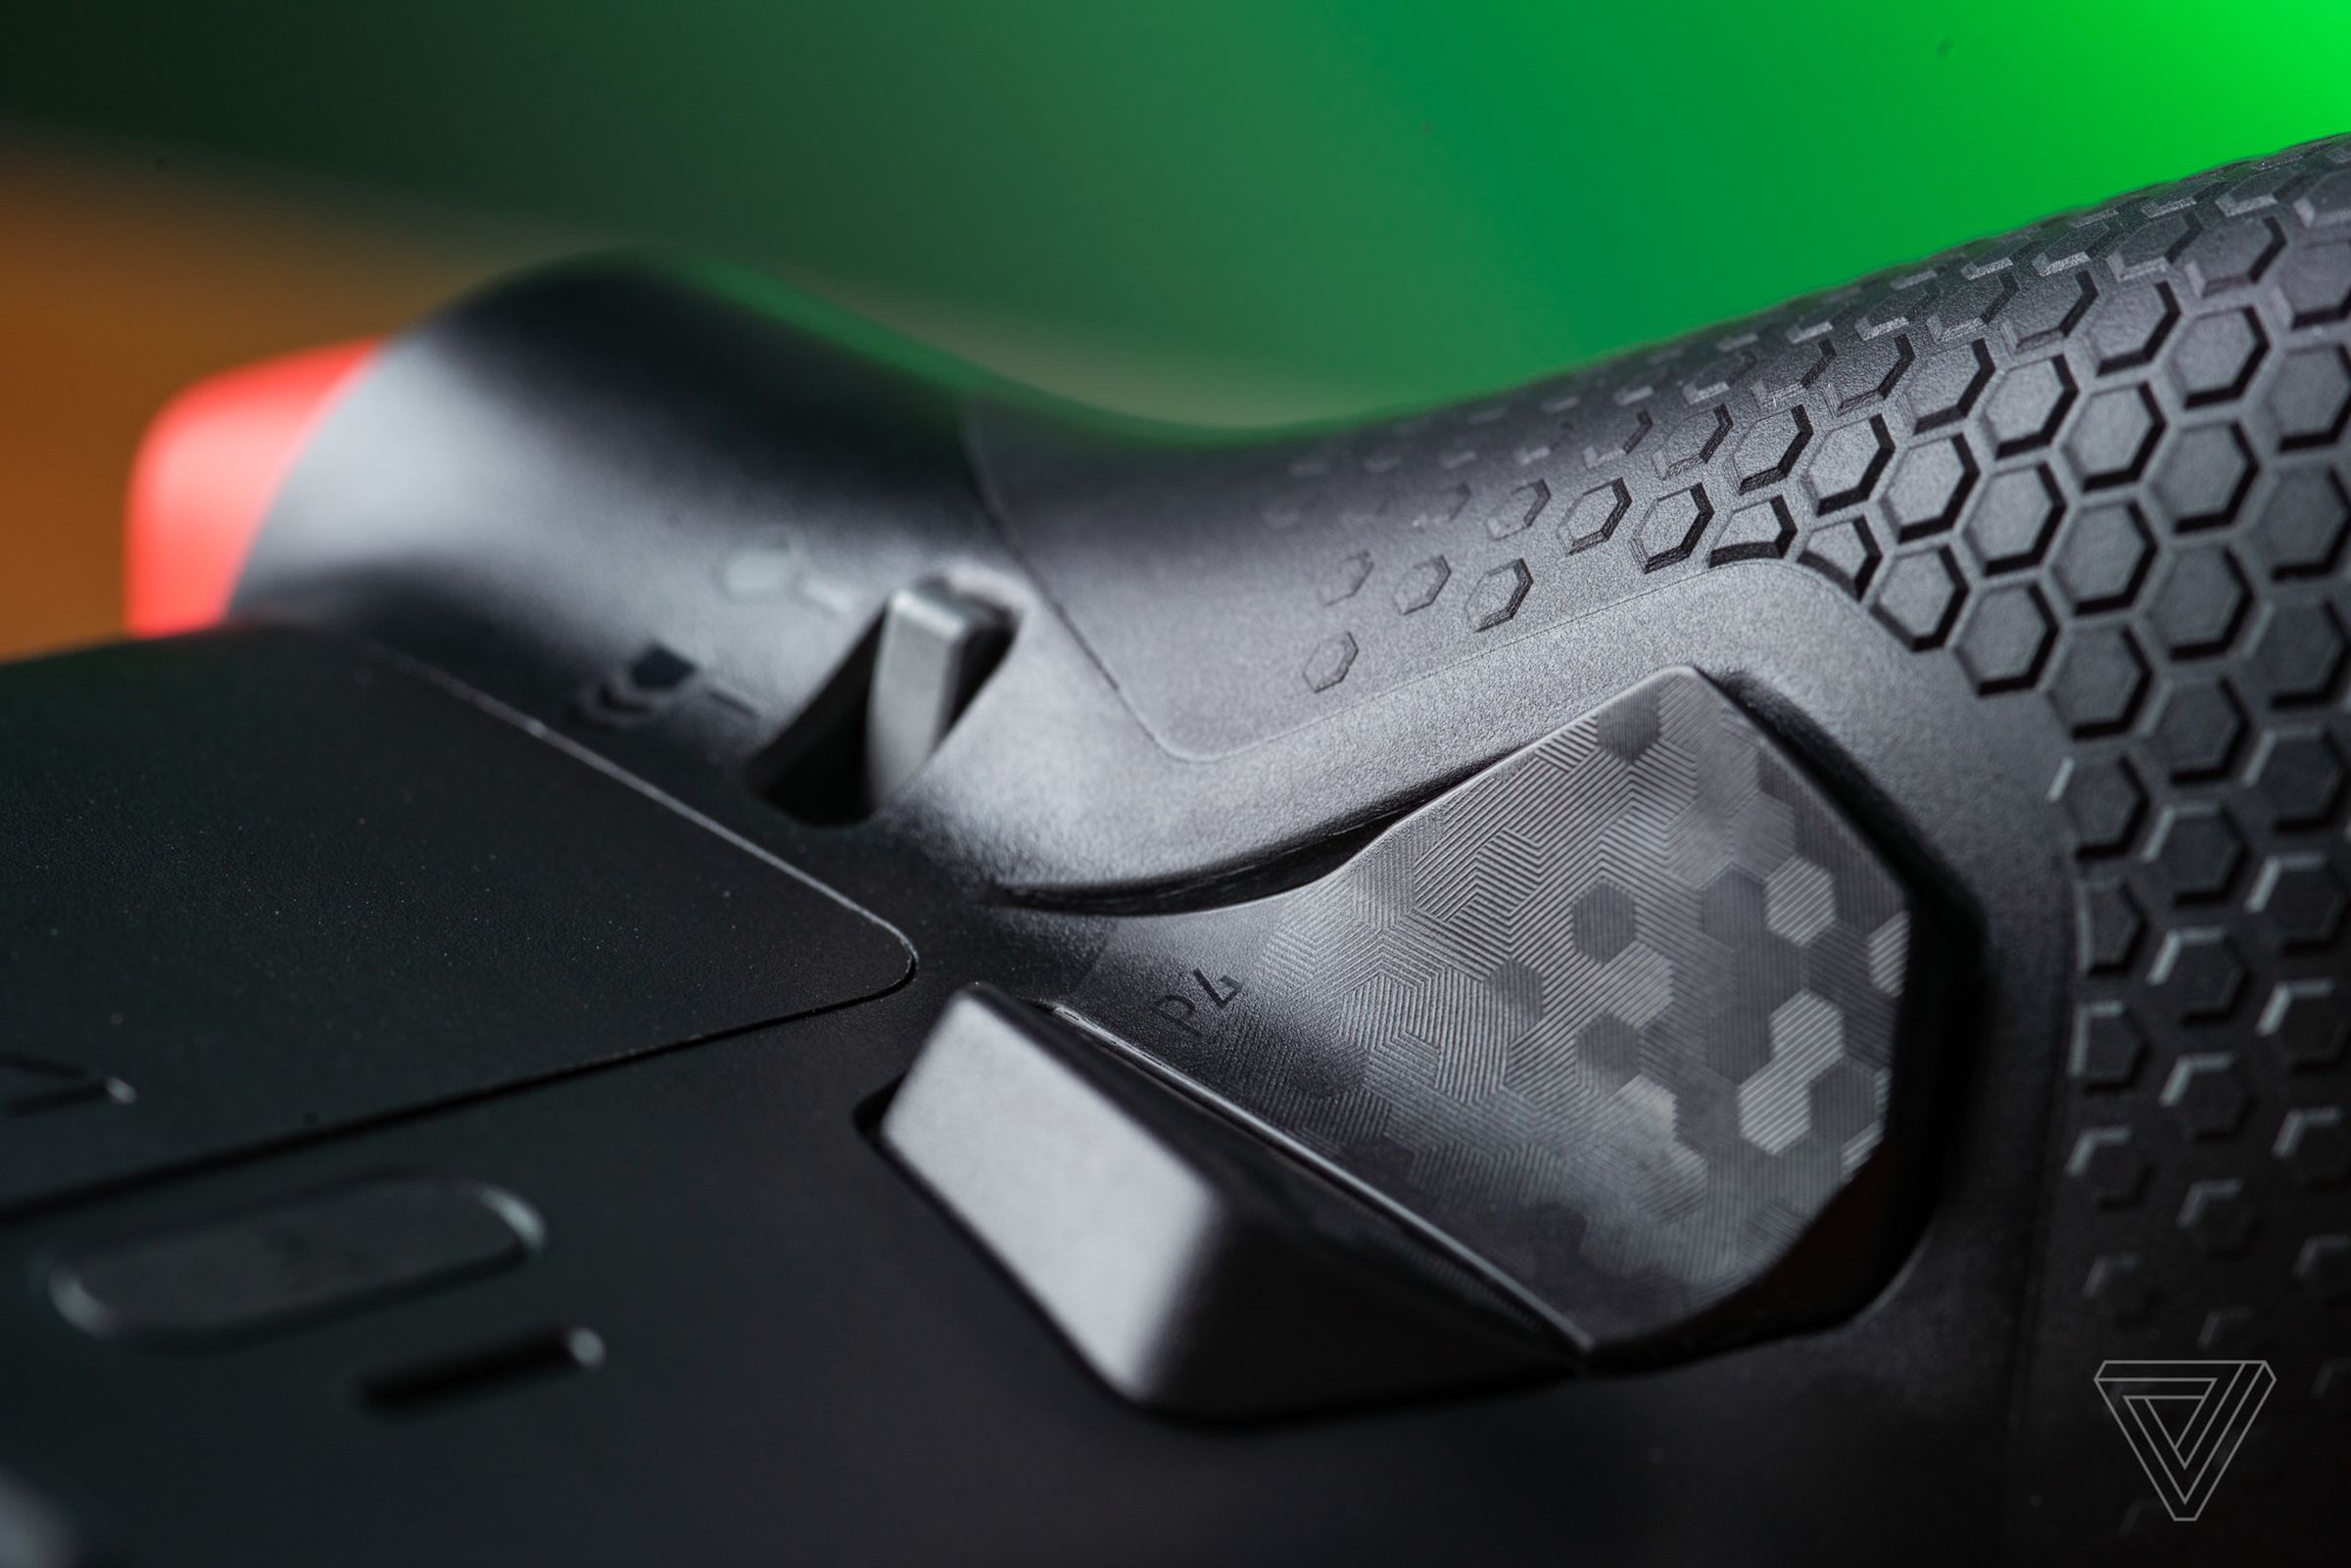 A macro closeup showing the details of the Scuf Instinct Pro’s rear buttons and soft grip texture.